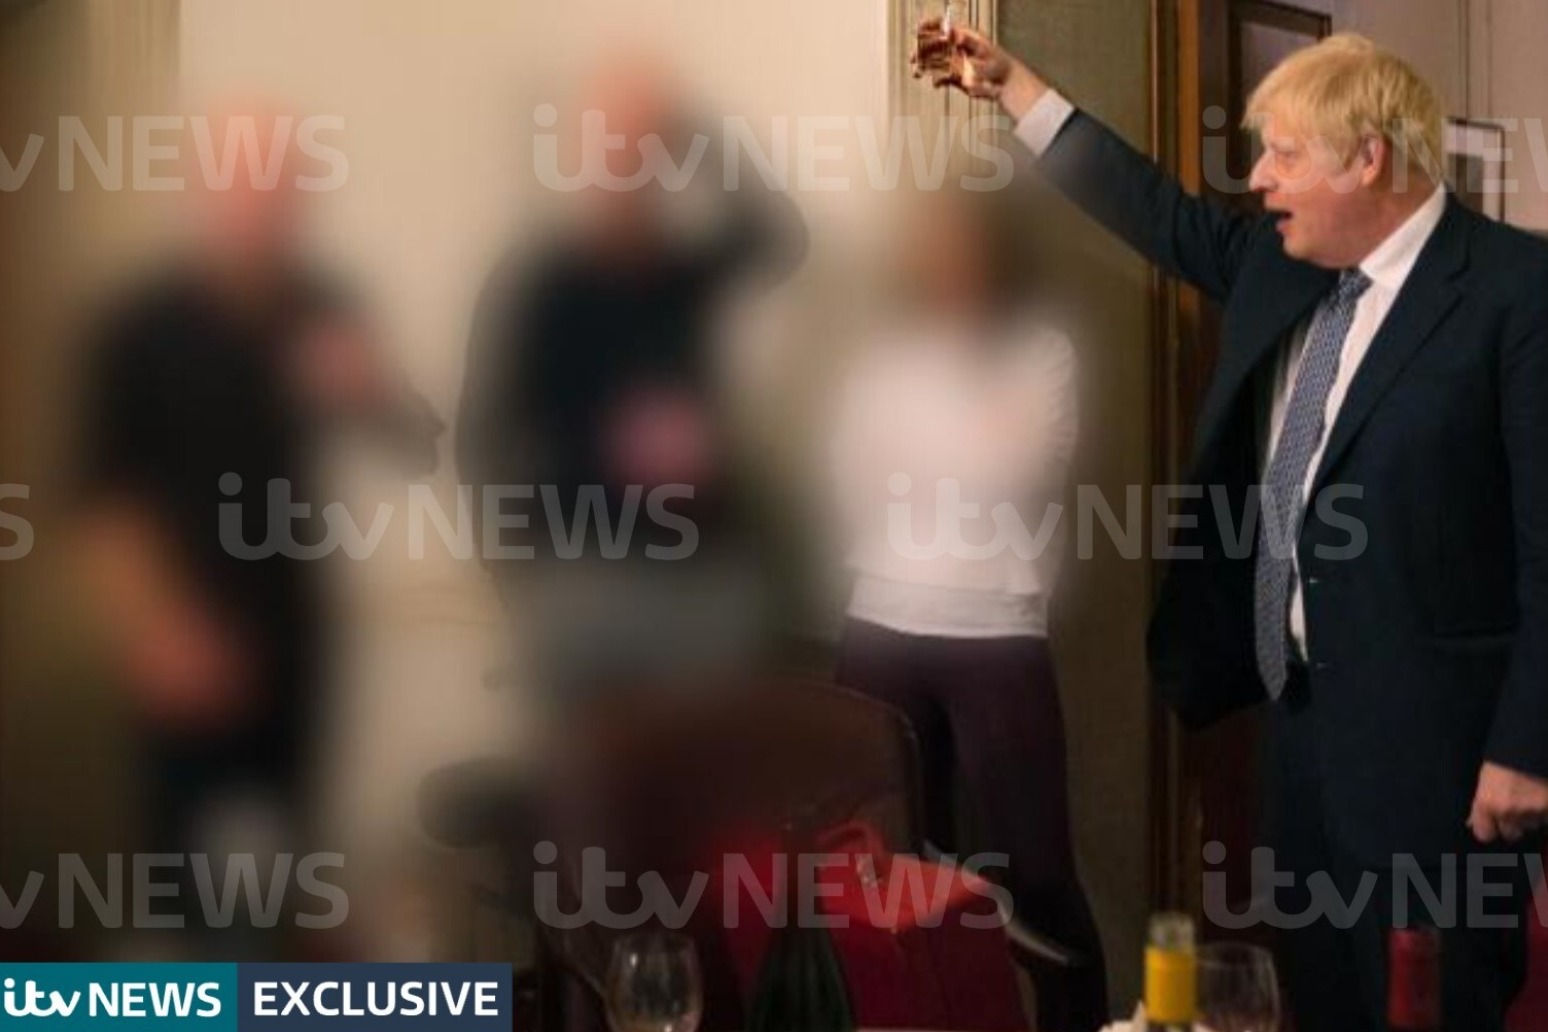 Pictures show Boris Johnson raising glass during lockdown leaving party 